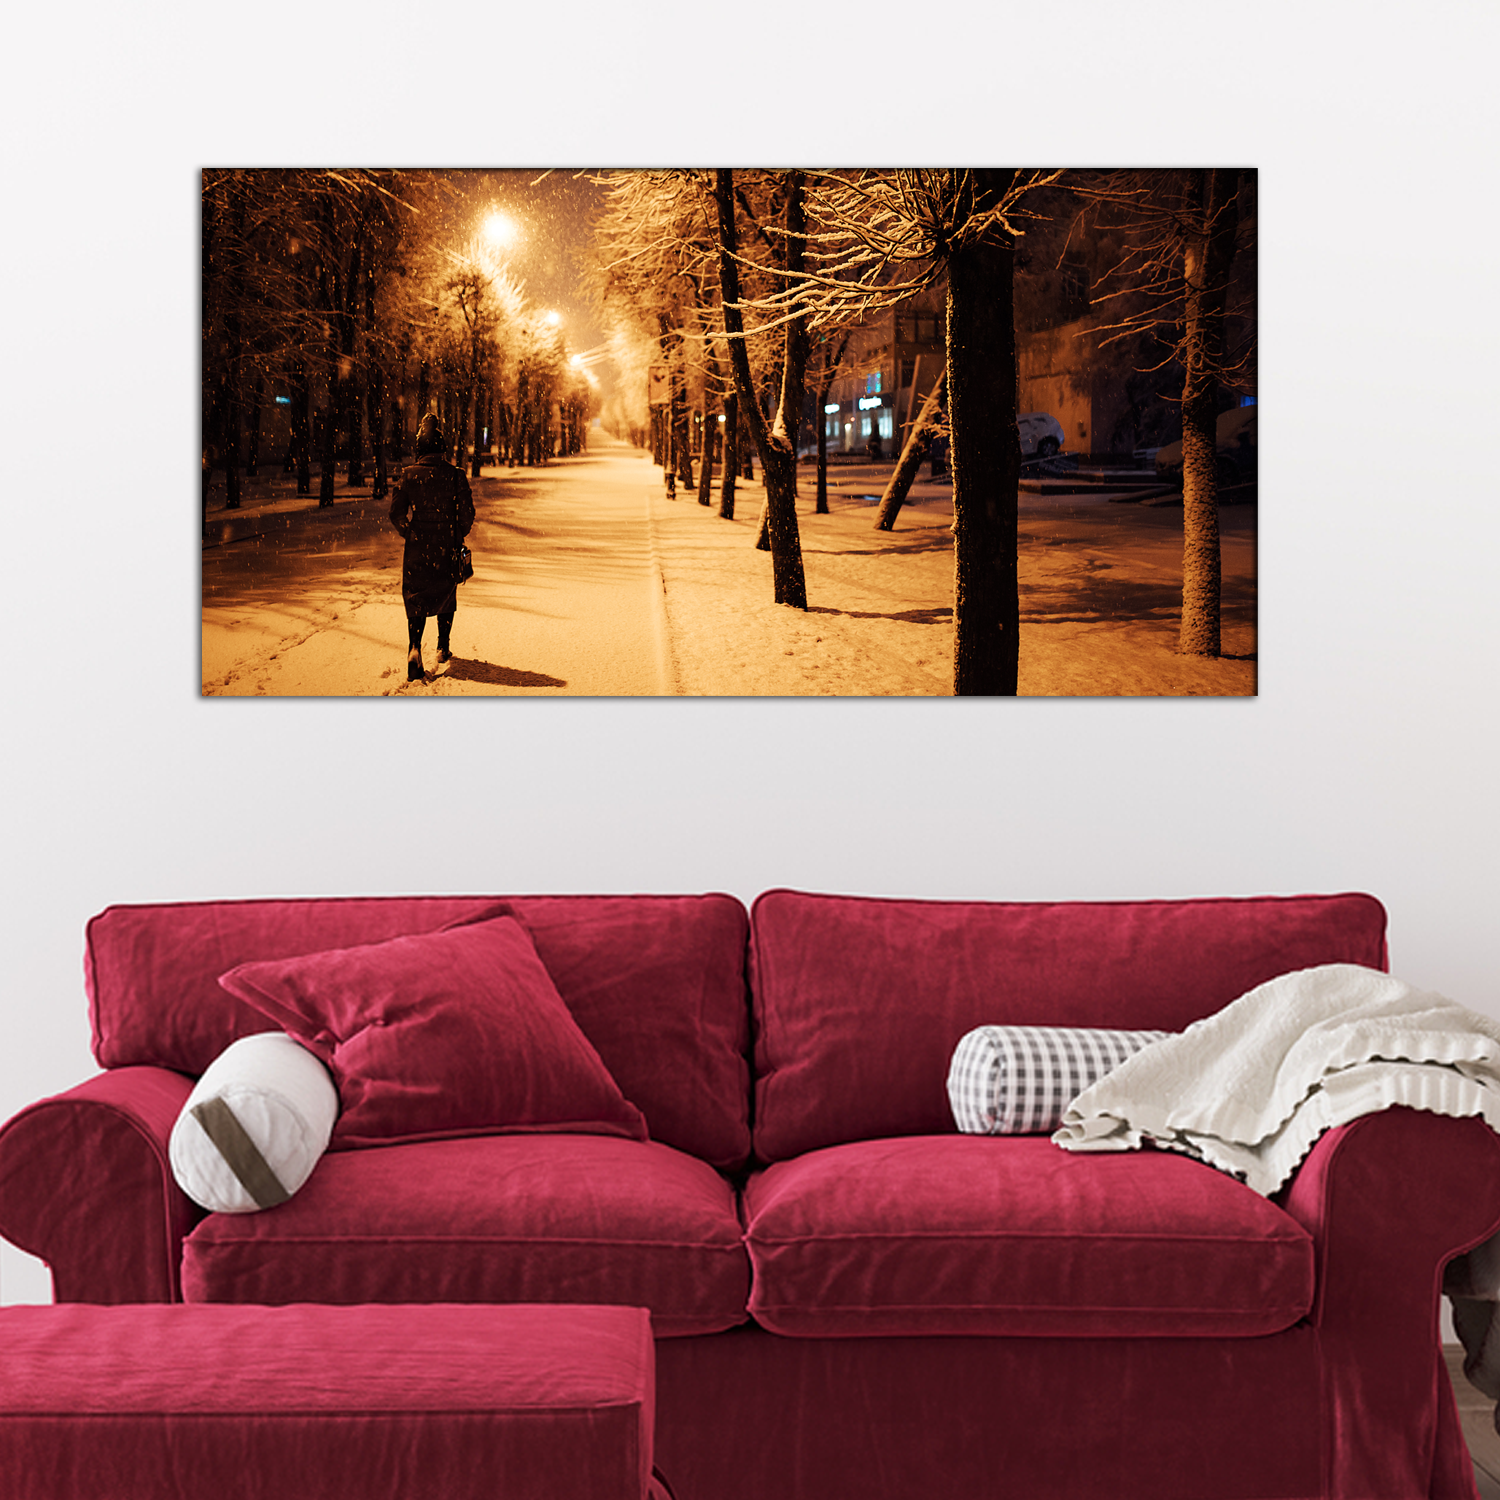 A Lonely Girl Walks Abstract Canvas Print Wall Painting